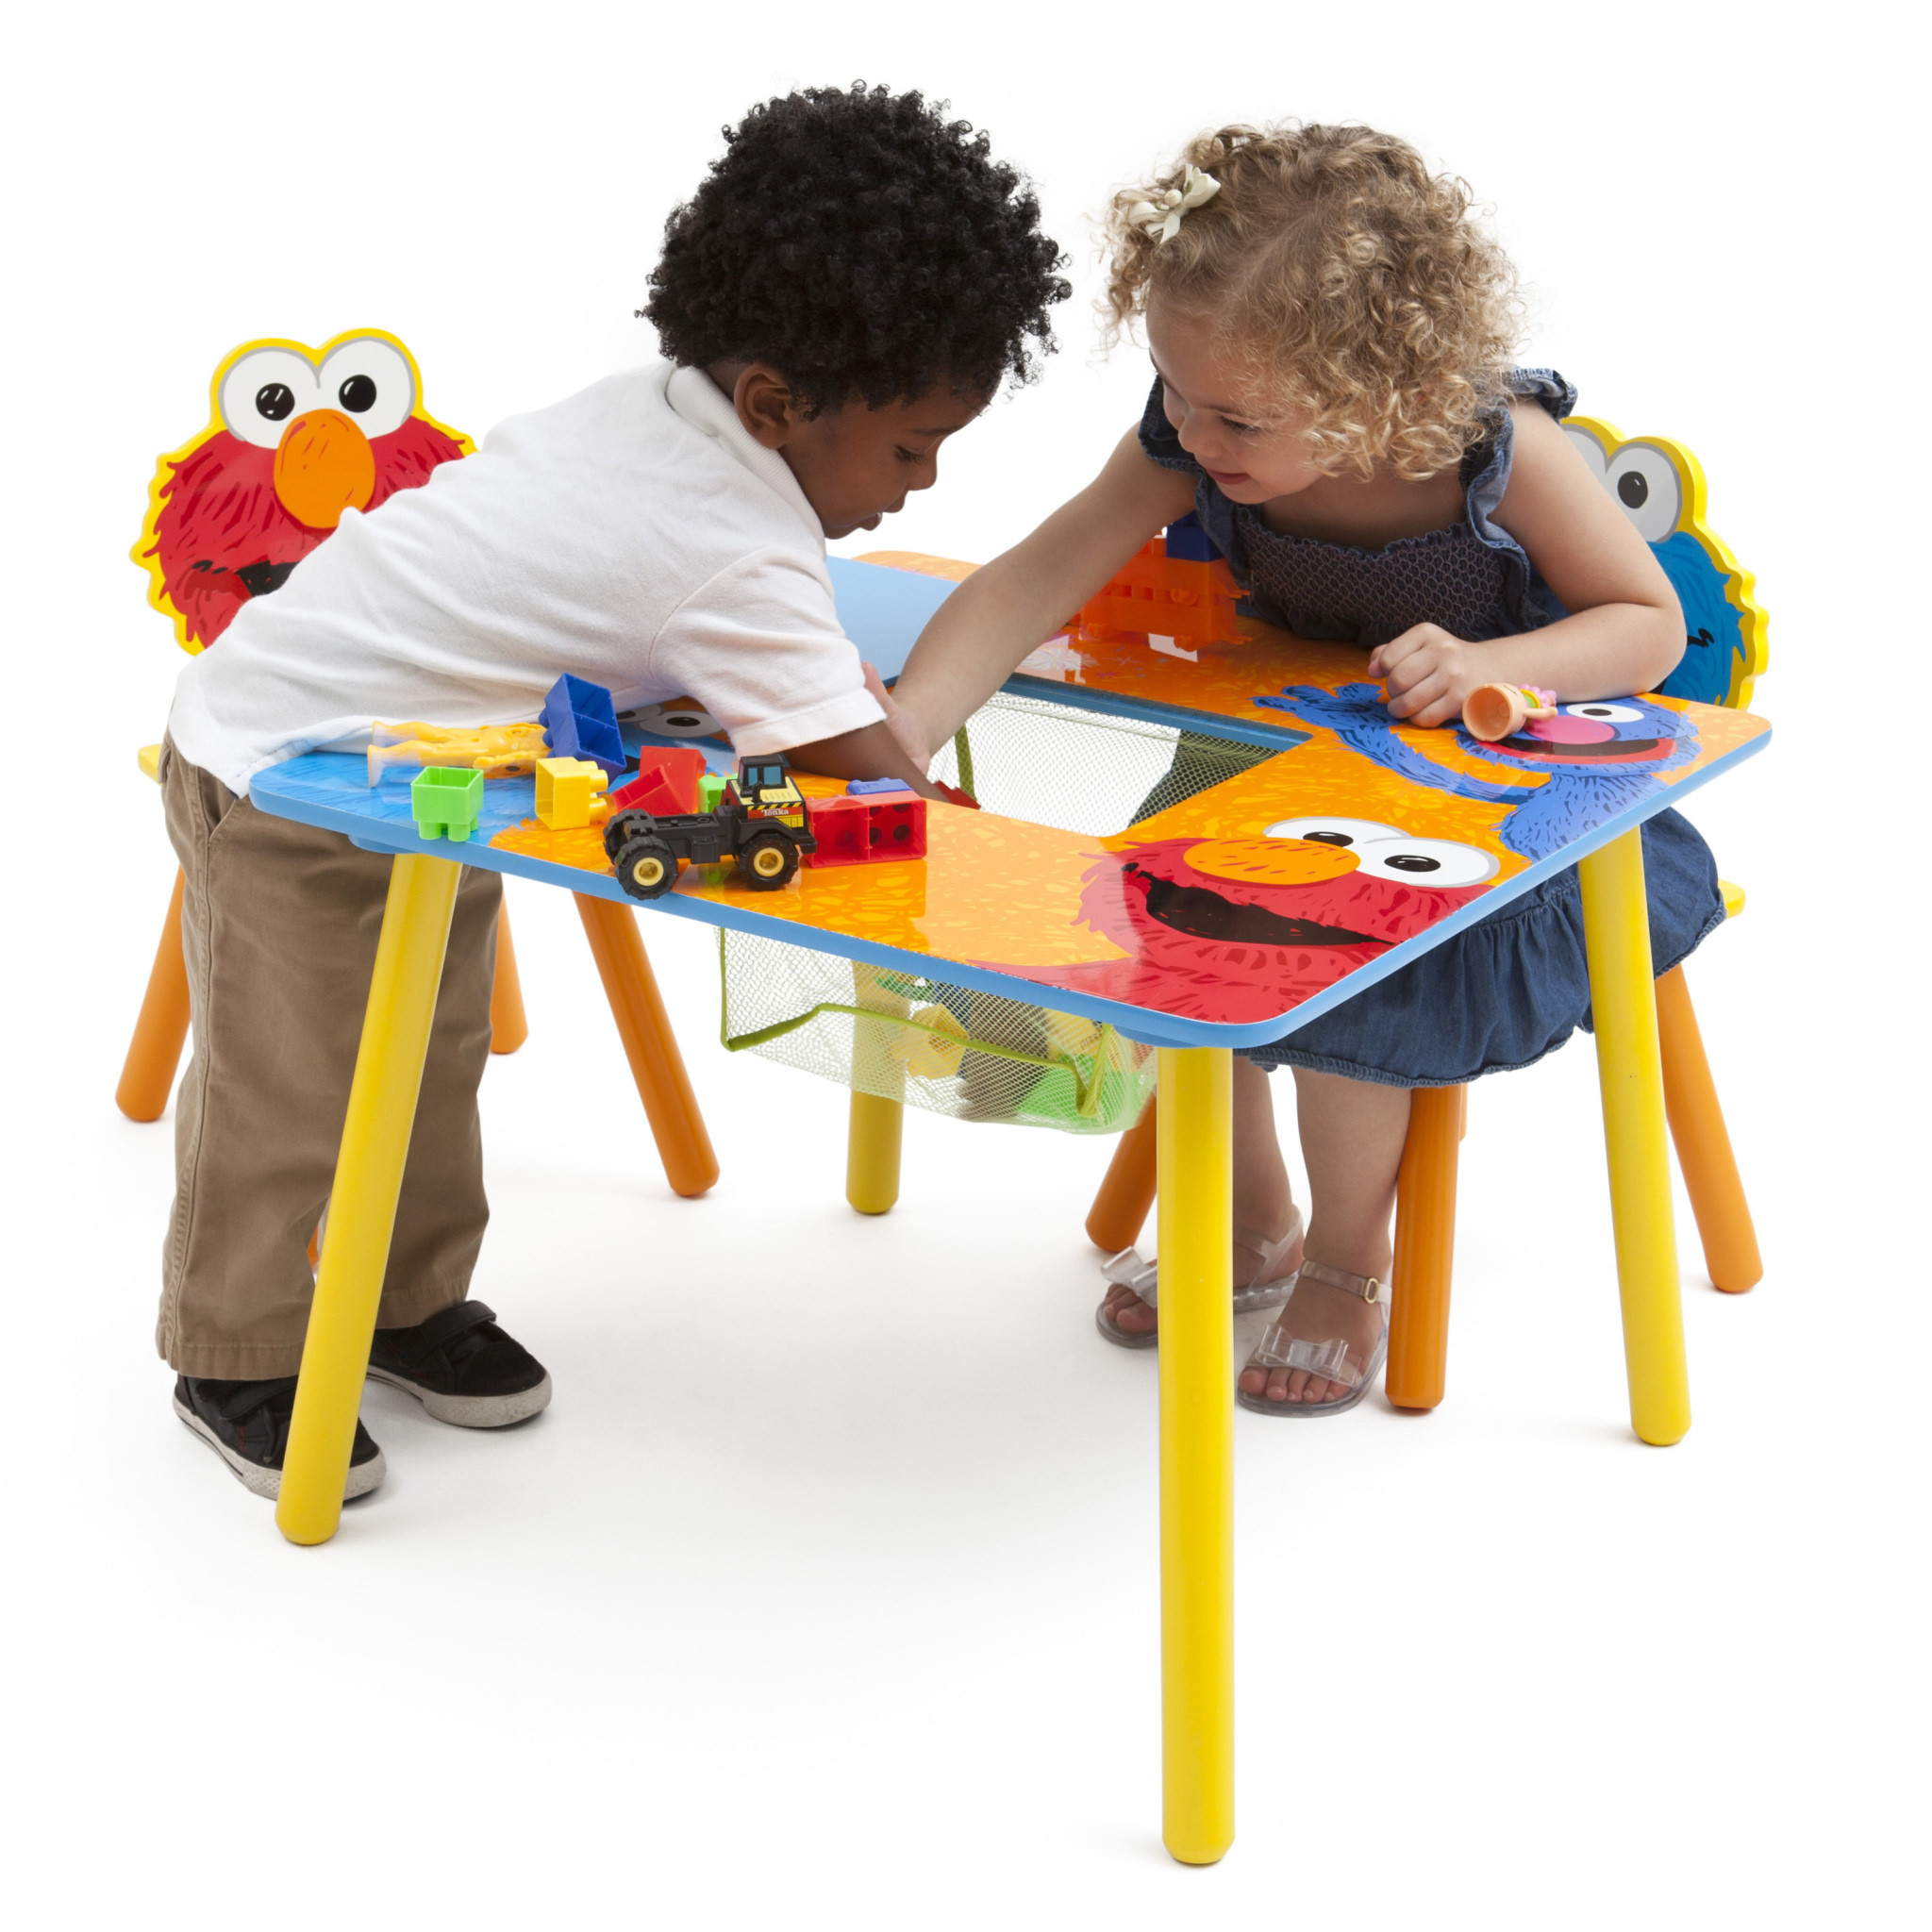 Walmart Kids Table Set
 Sesame Street Wood Kids Storage Table and Chairs Set by